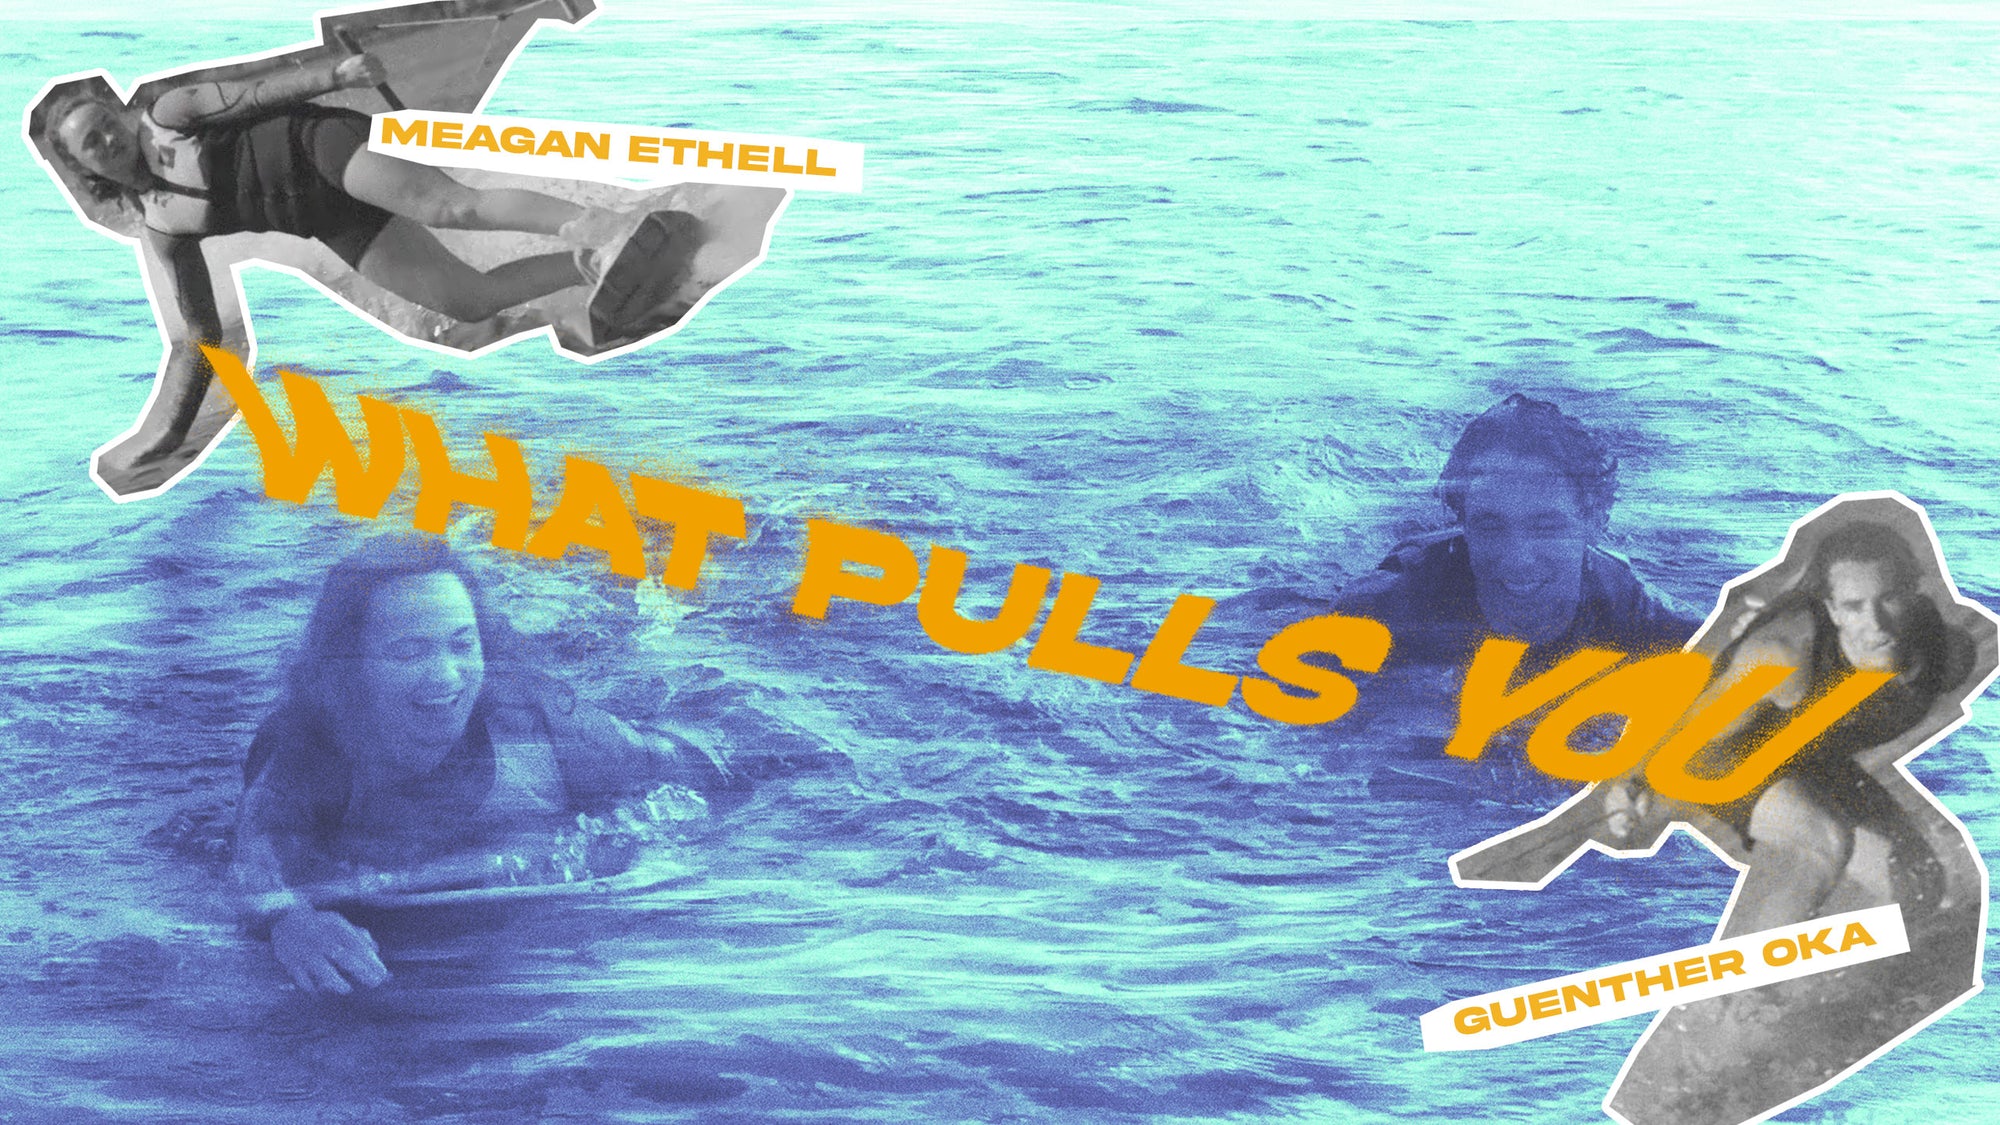 What Pulls You - Meagan Ethell and Guenther Oka